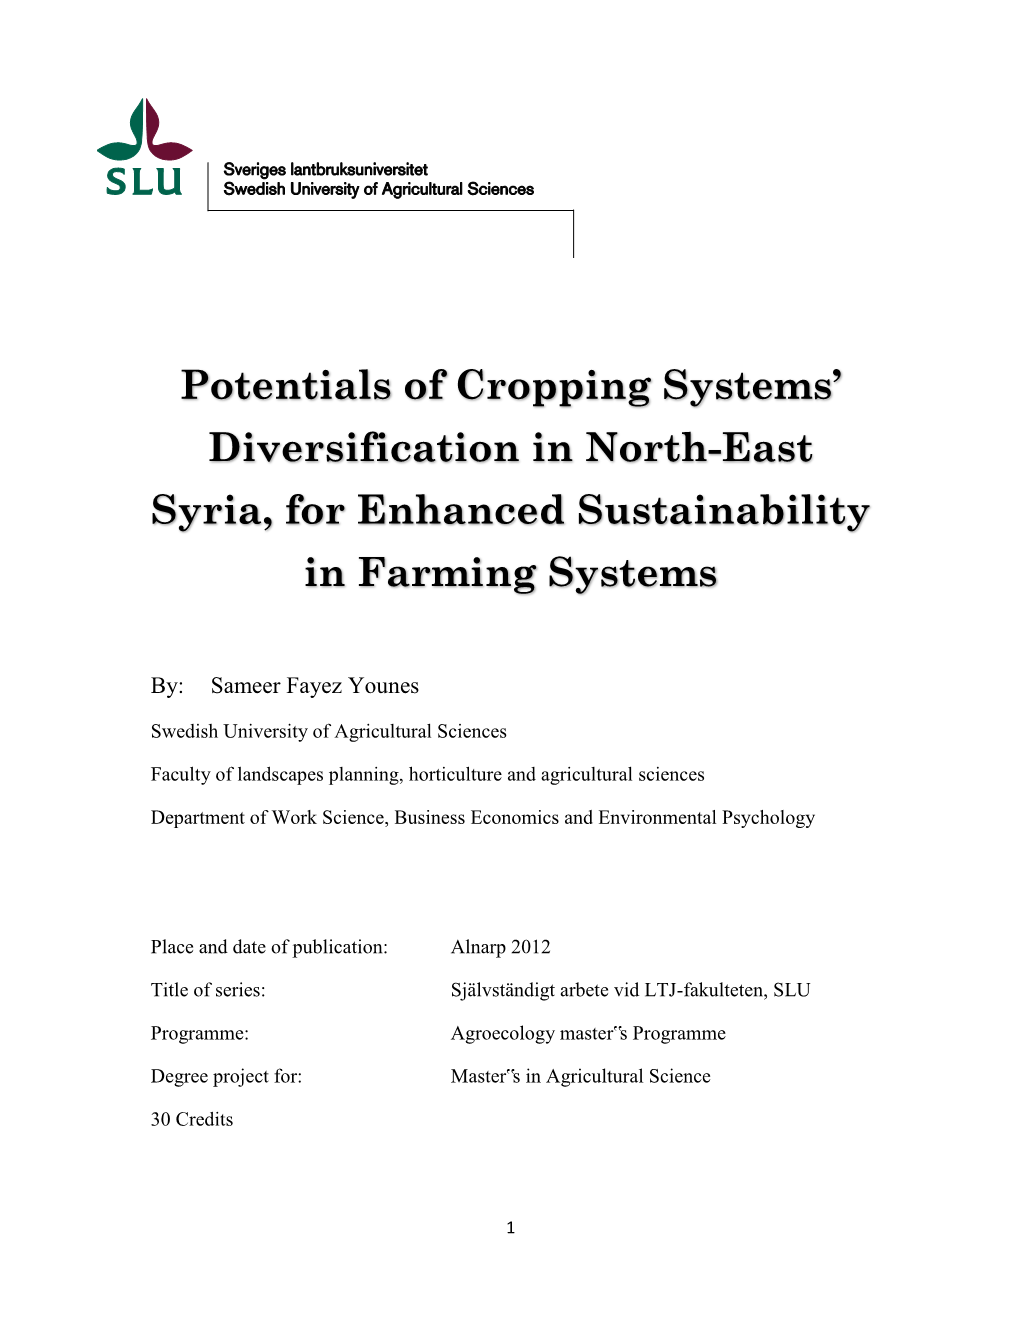 Potentials of Cropping Systems' Diversification in North-East Syria, for Enhanced Sustainability in Farming Systems